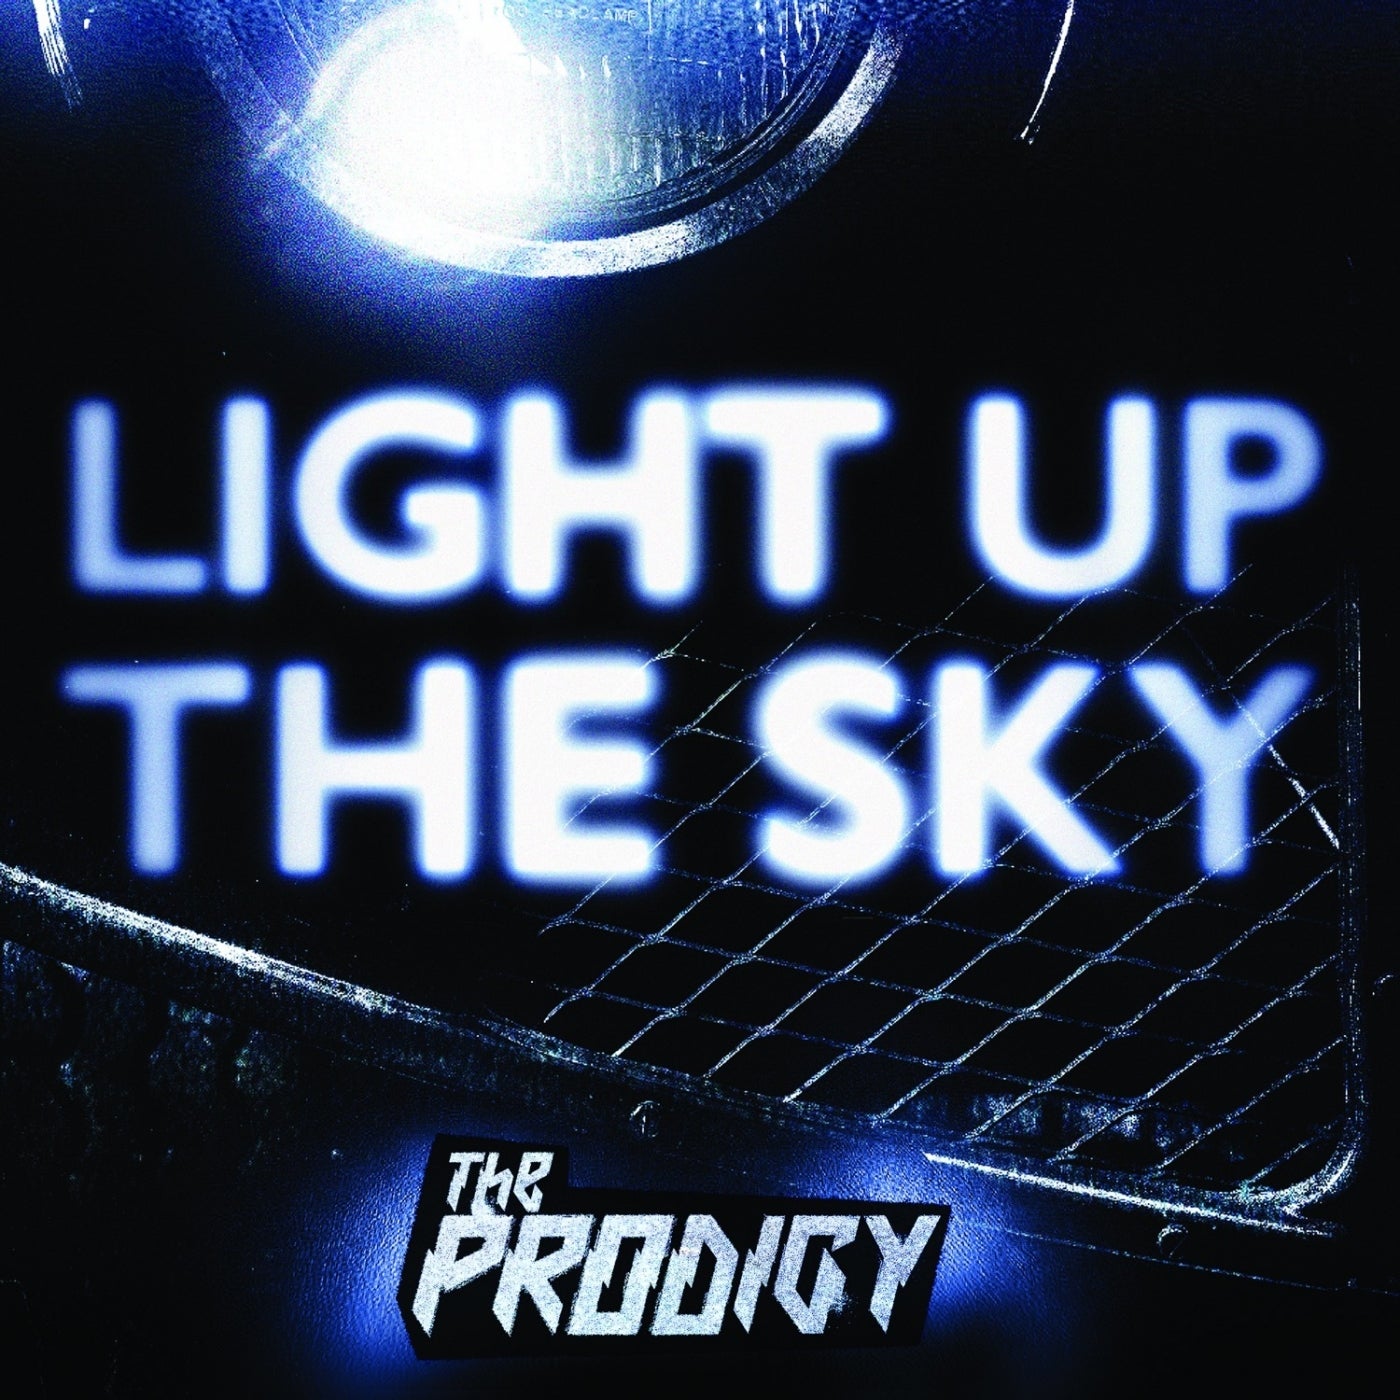 prodigy discography download